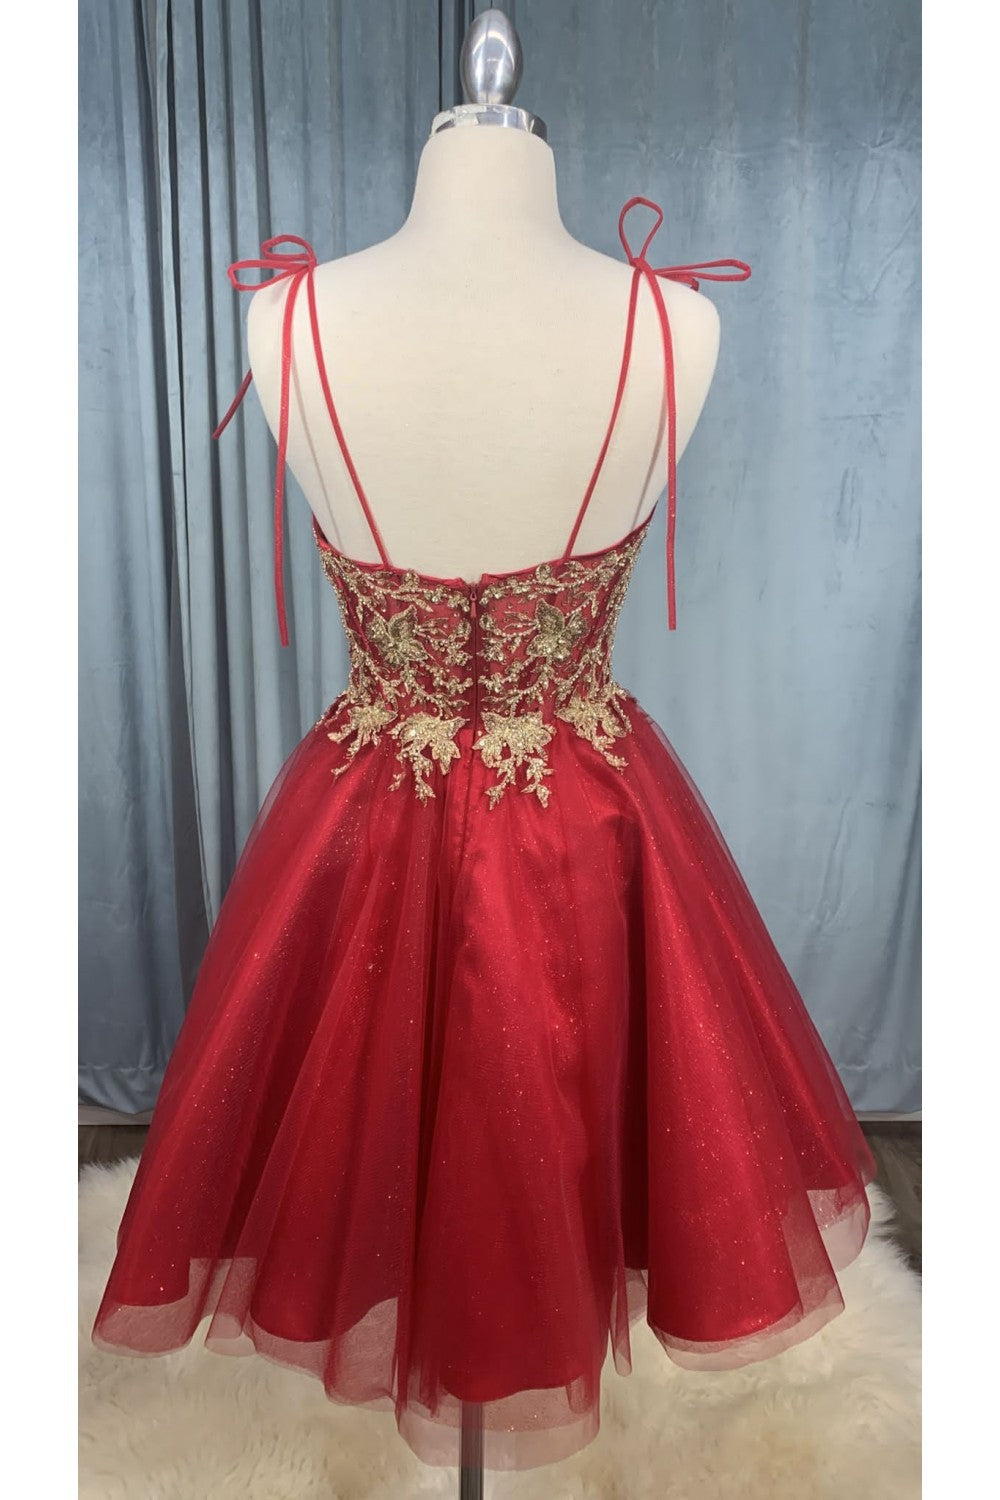 Short Tulle Prom & Bridesmaid Gown Sleeveless Laced Appliqué Dresses Floral Bodice Princess Babydoll Skirt CDCD0188-2